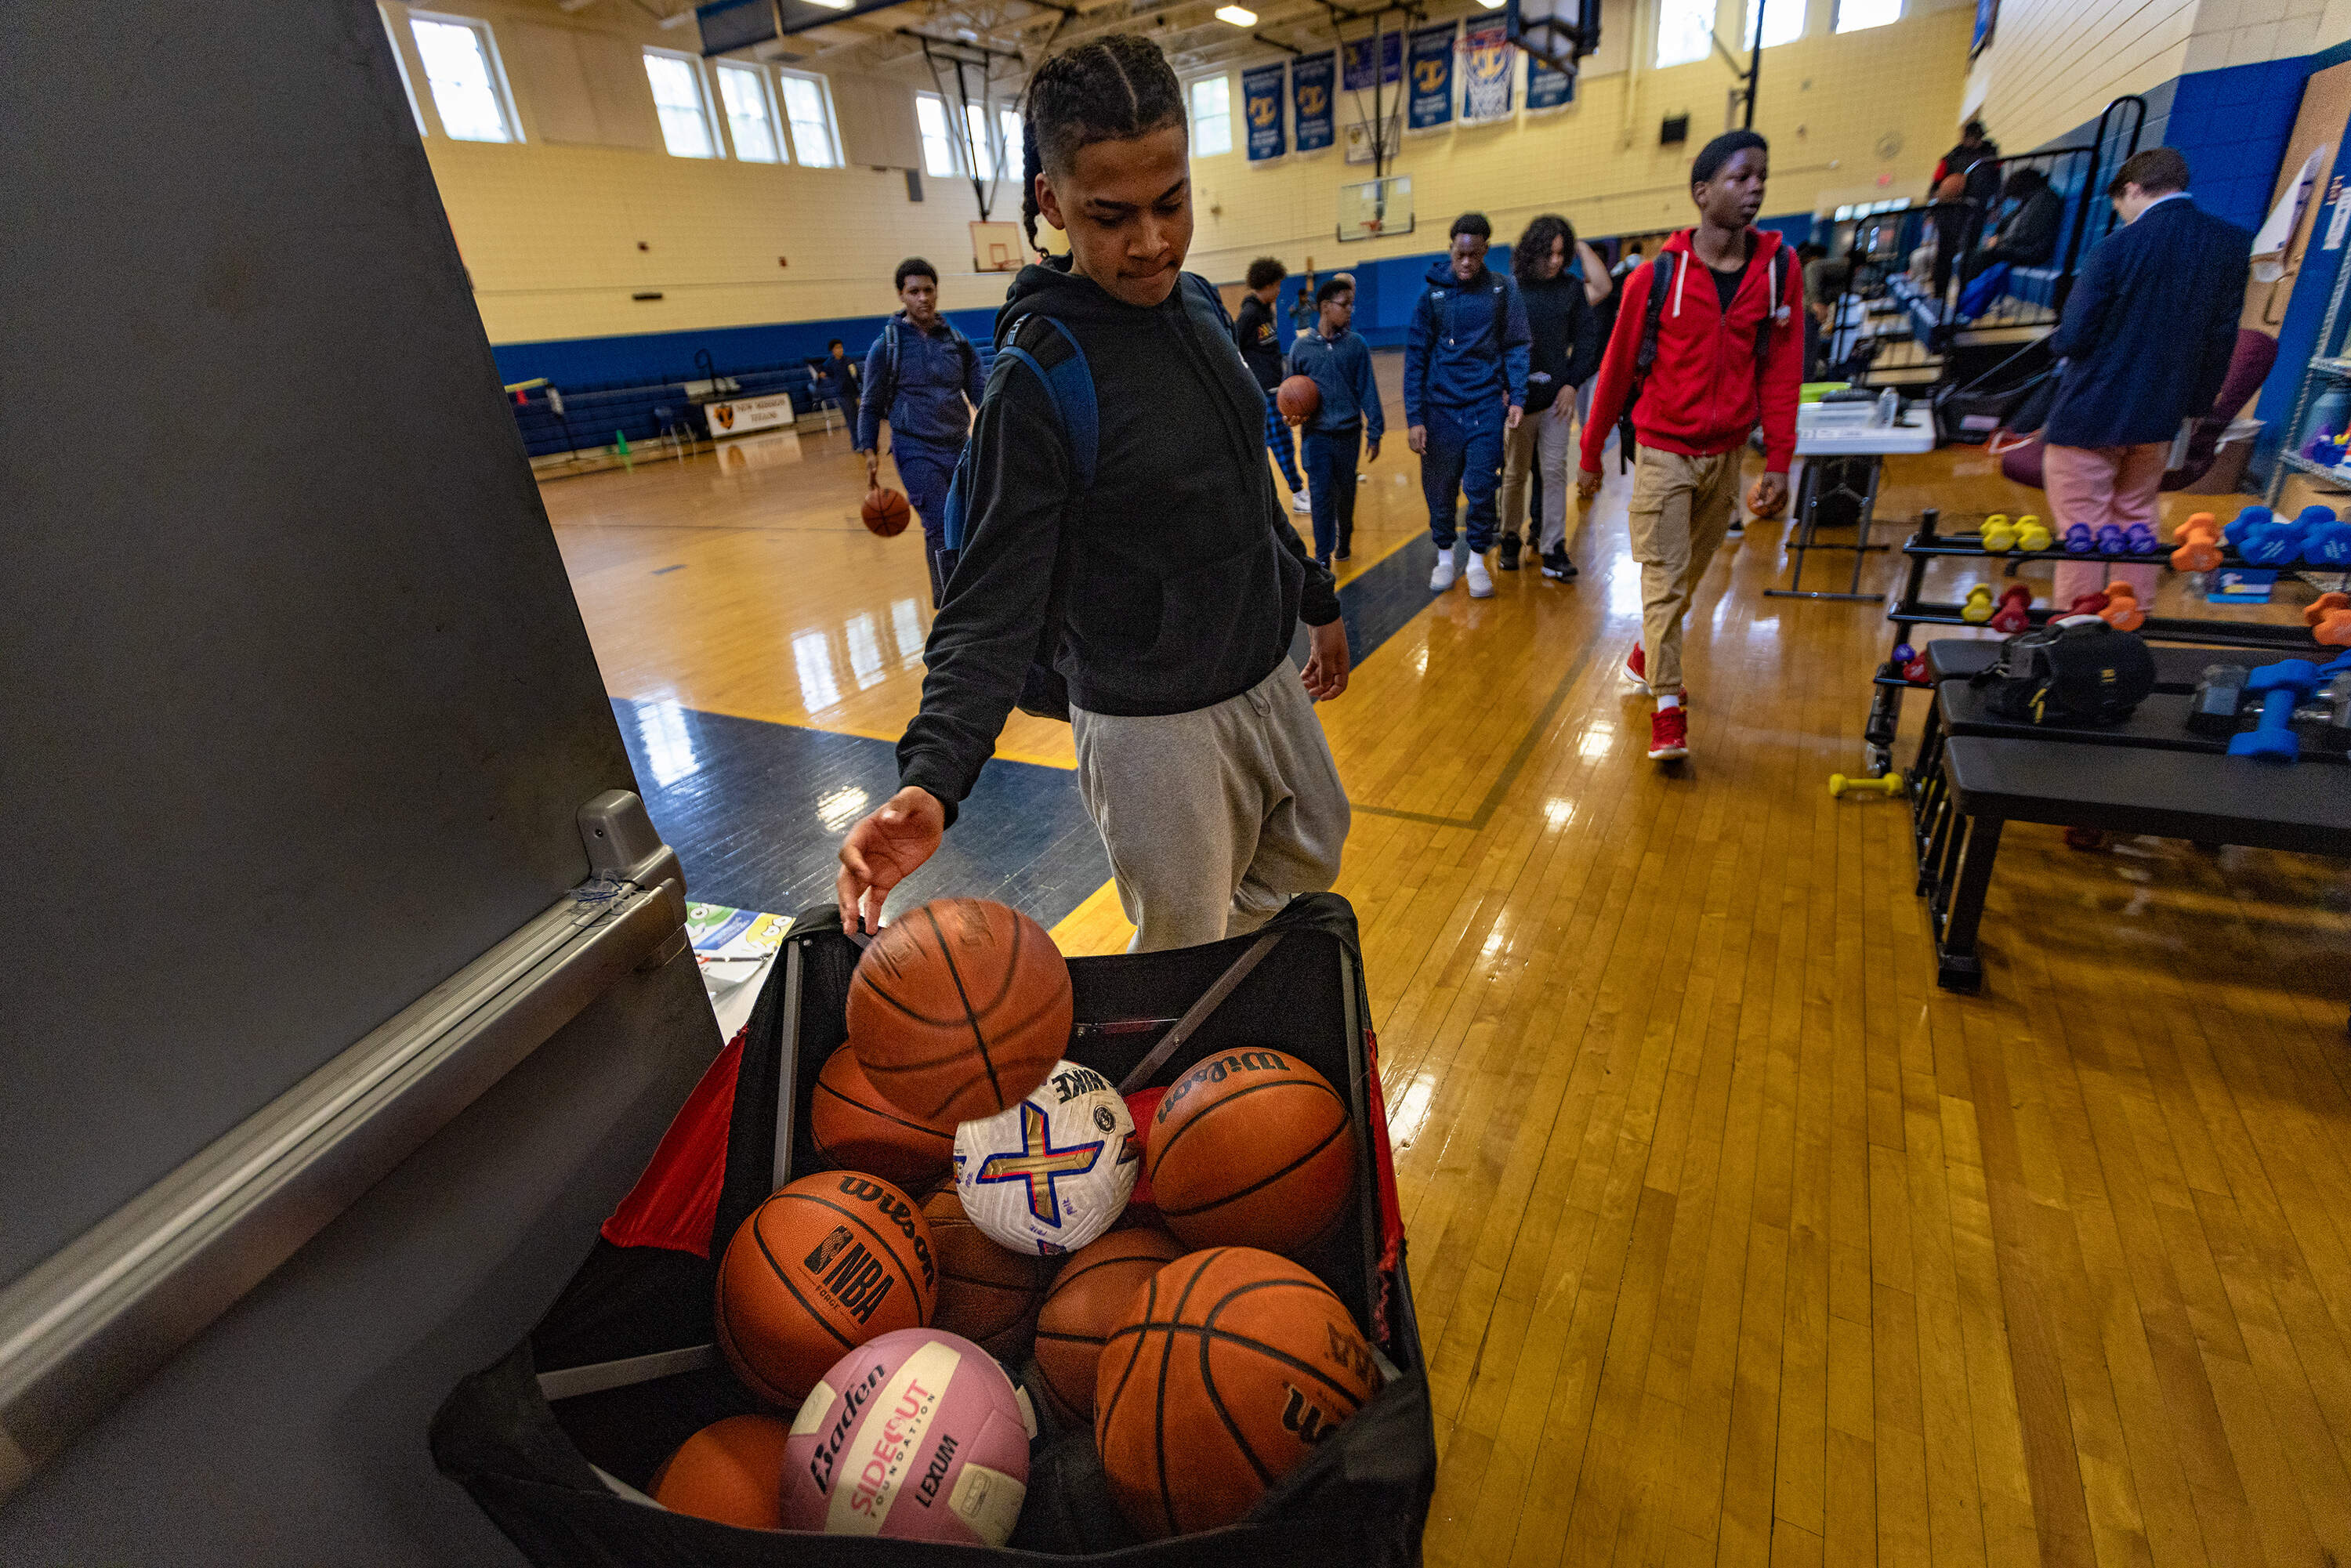 Students file out and return basketballs after the school bell rings to signal the start of classes at New Mission High in Hyde Park. (Jesse Costa/WBUR)